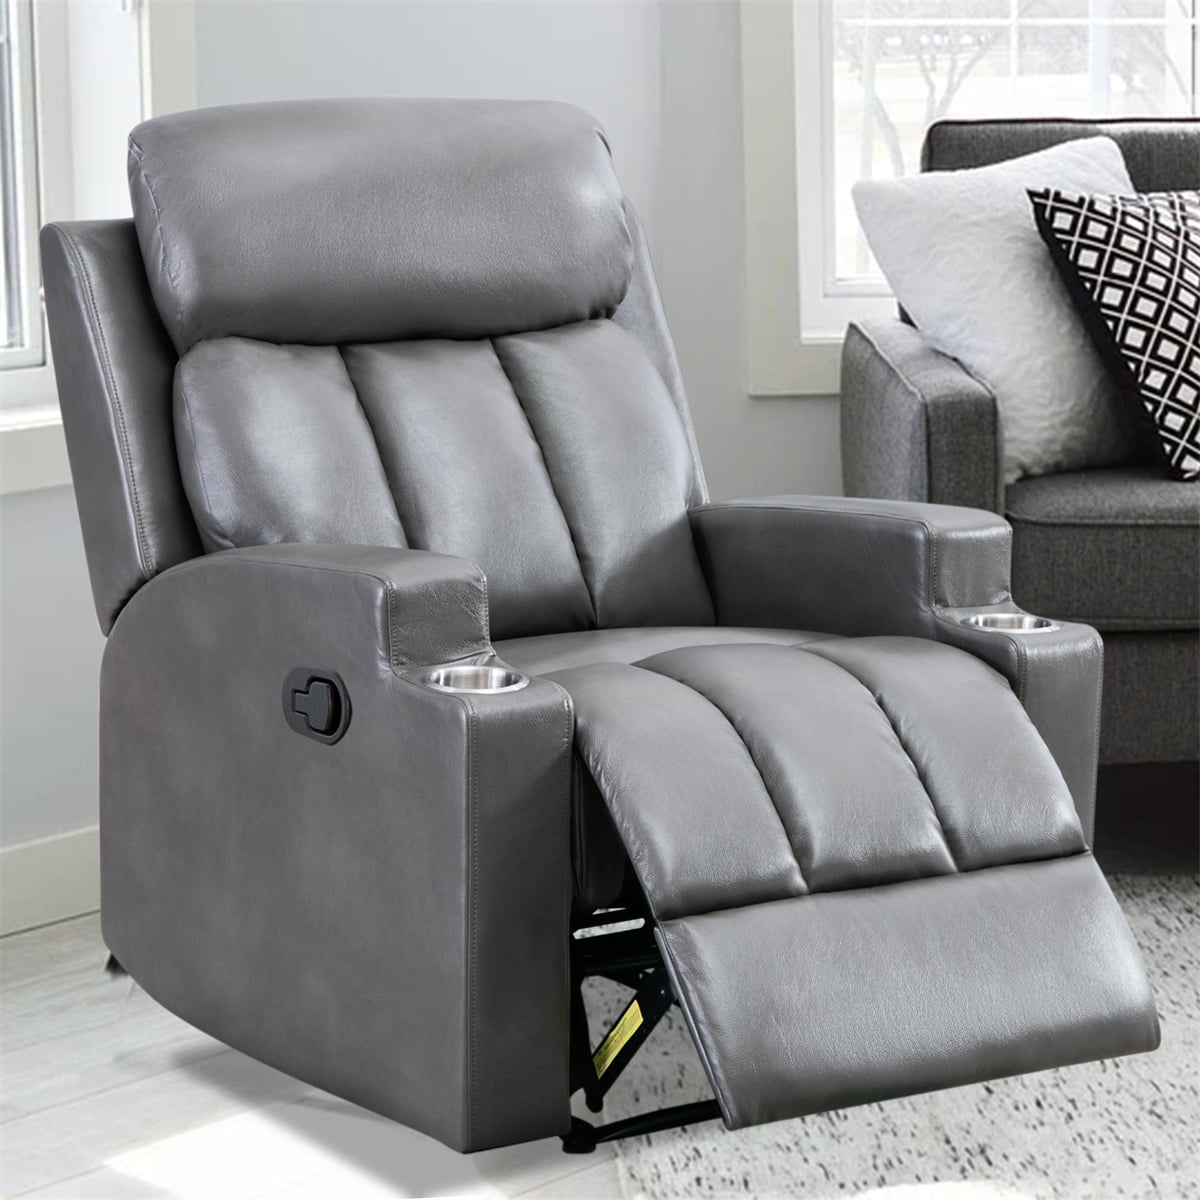 Recliner Chair Overstuffed Heavy Duty Livingroom Reclining Faux Air Leather Sofa 